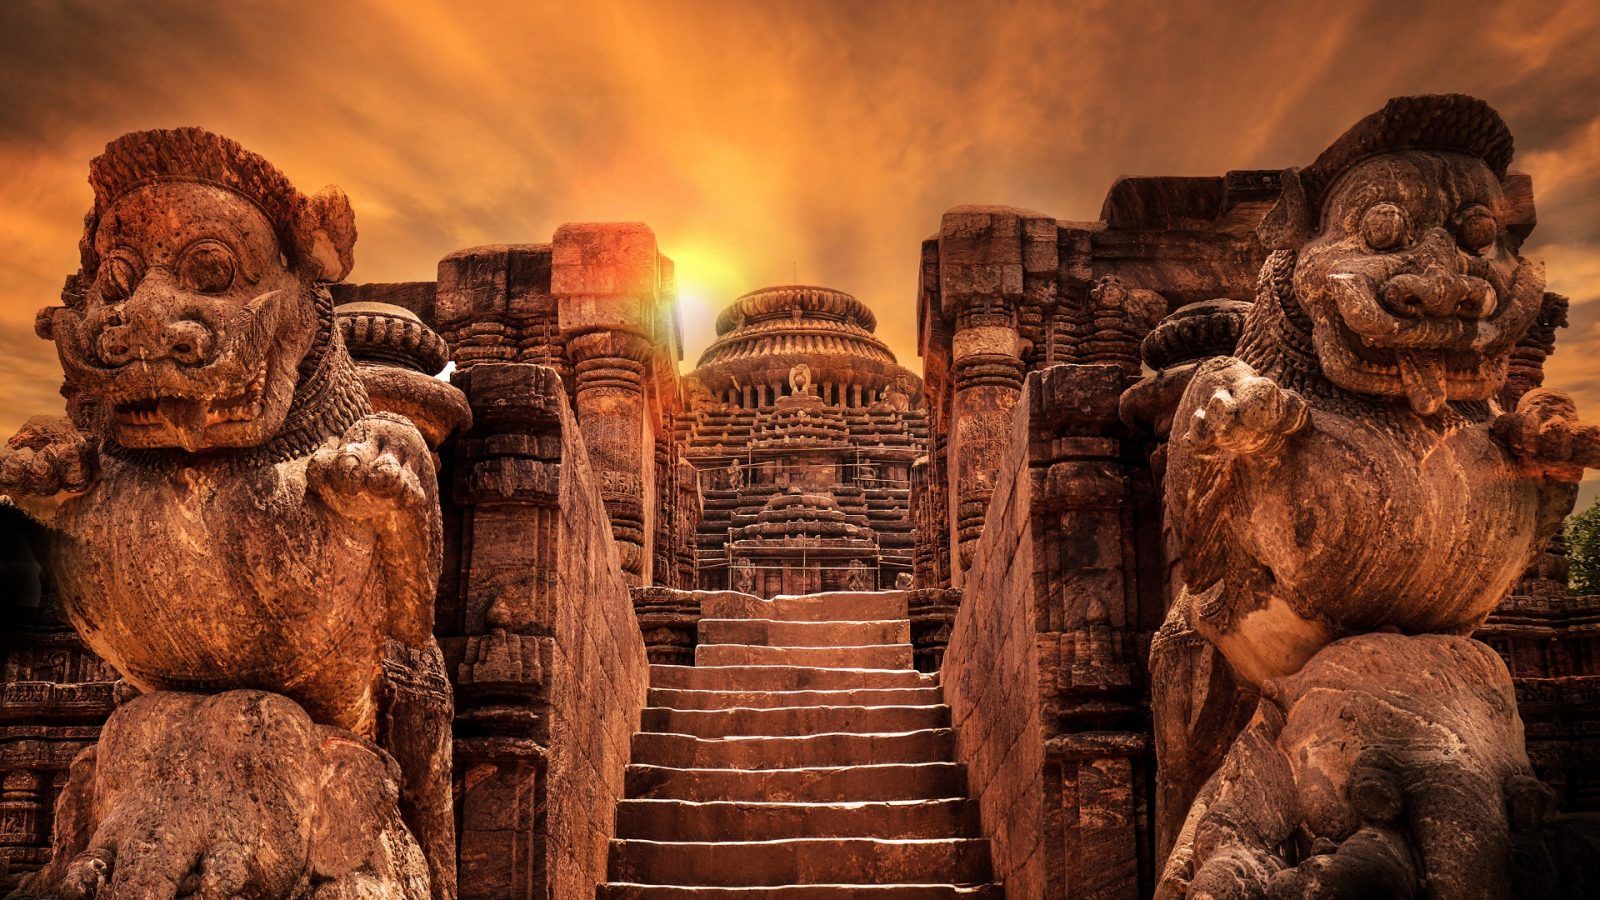 Odisha's Konark Sun Temple Is The Most Photographed Building At Night